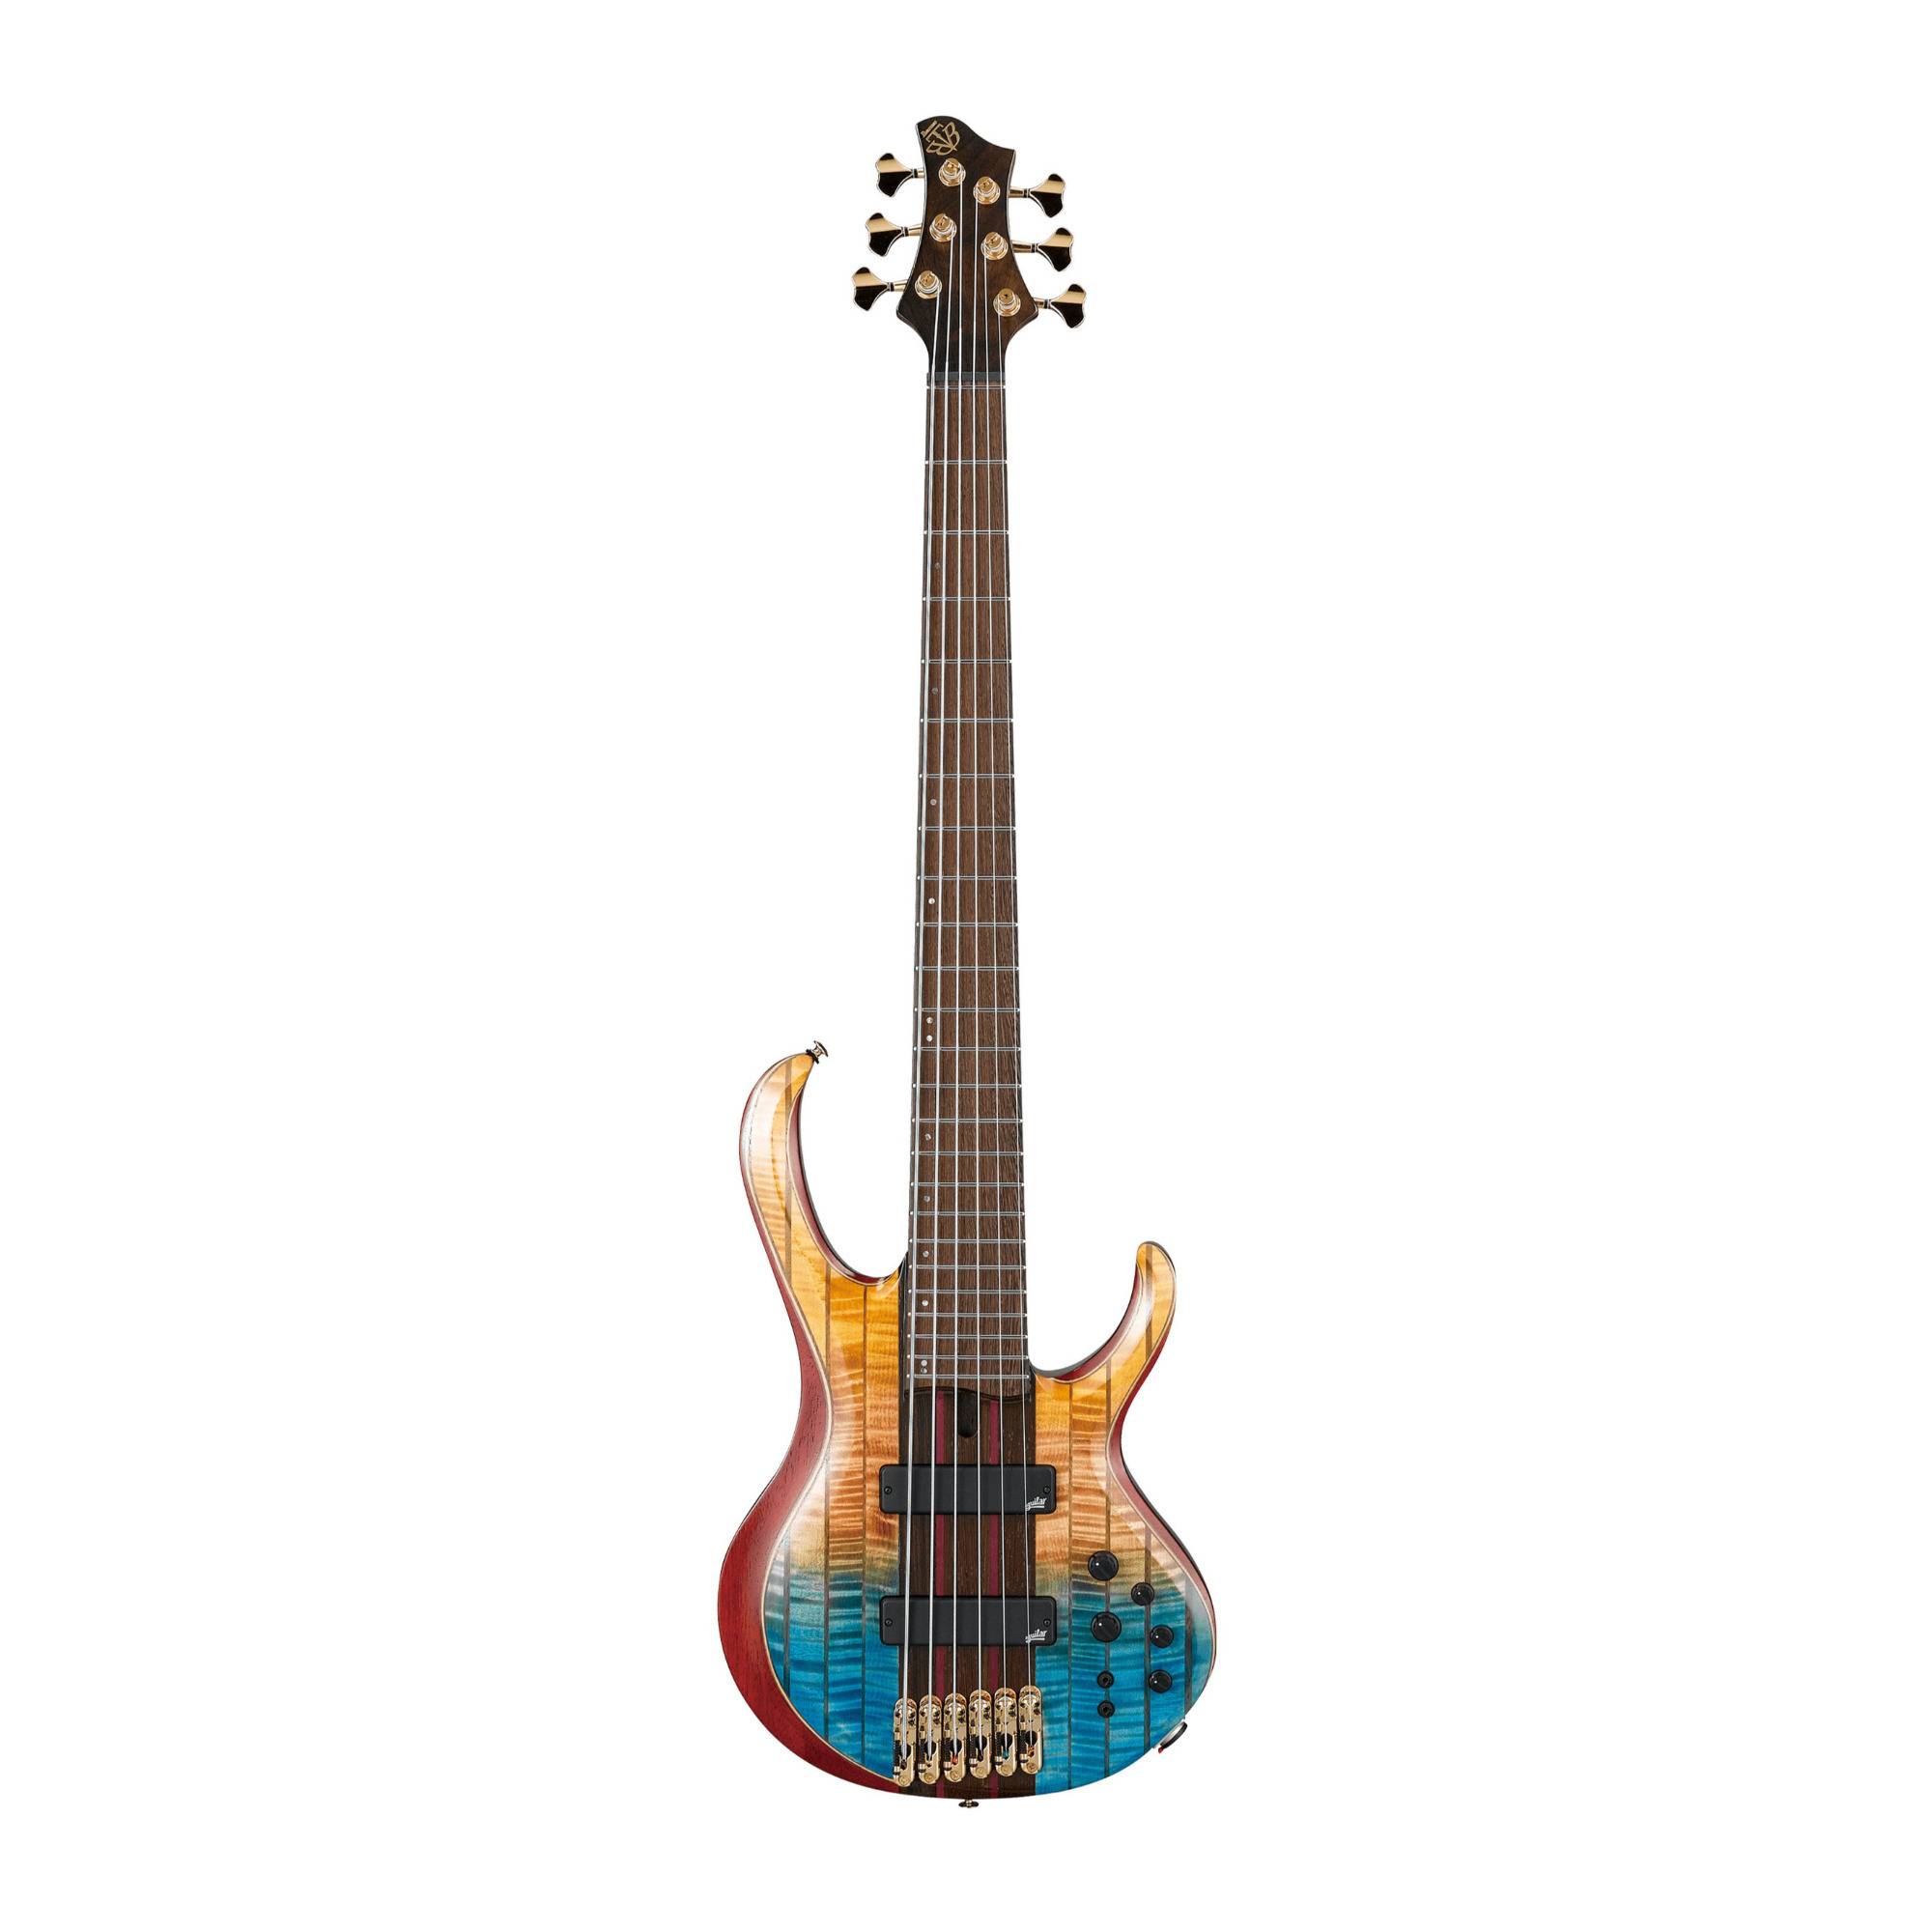 Ibanez BTB Premium 6-String Right-Handed Electric Bass (Sunset Fade Low Gloss)